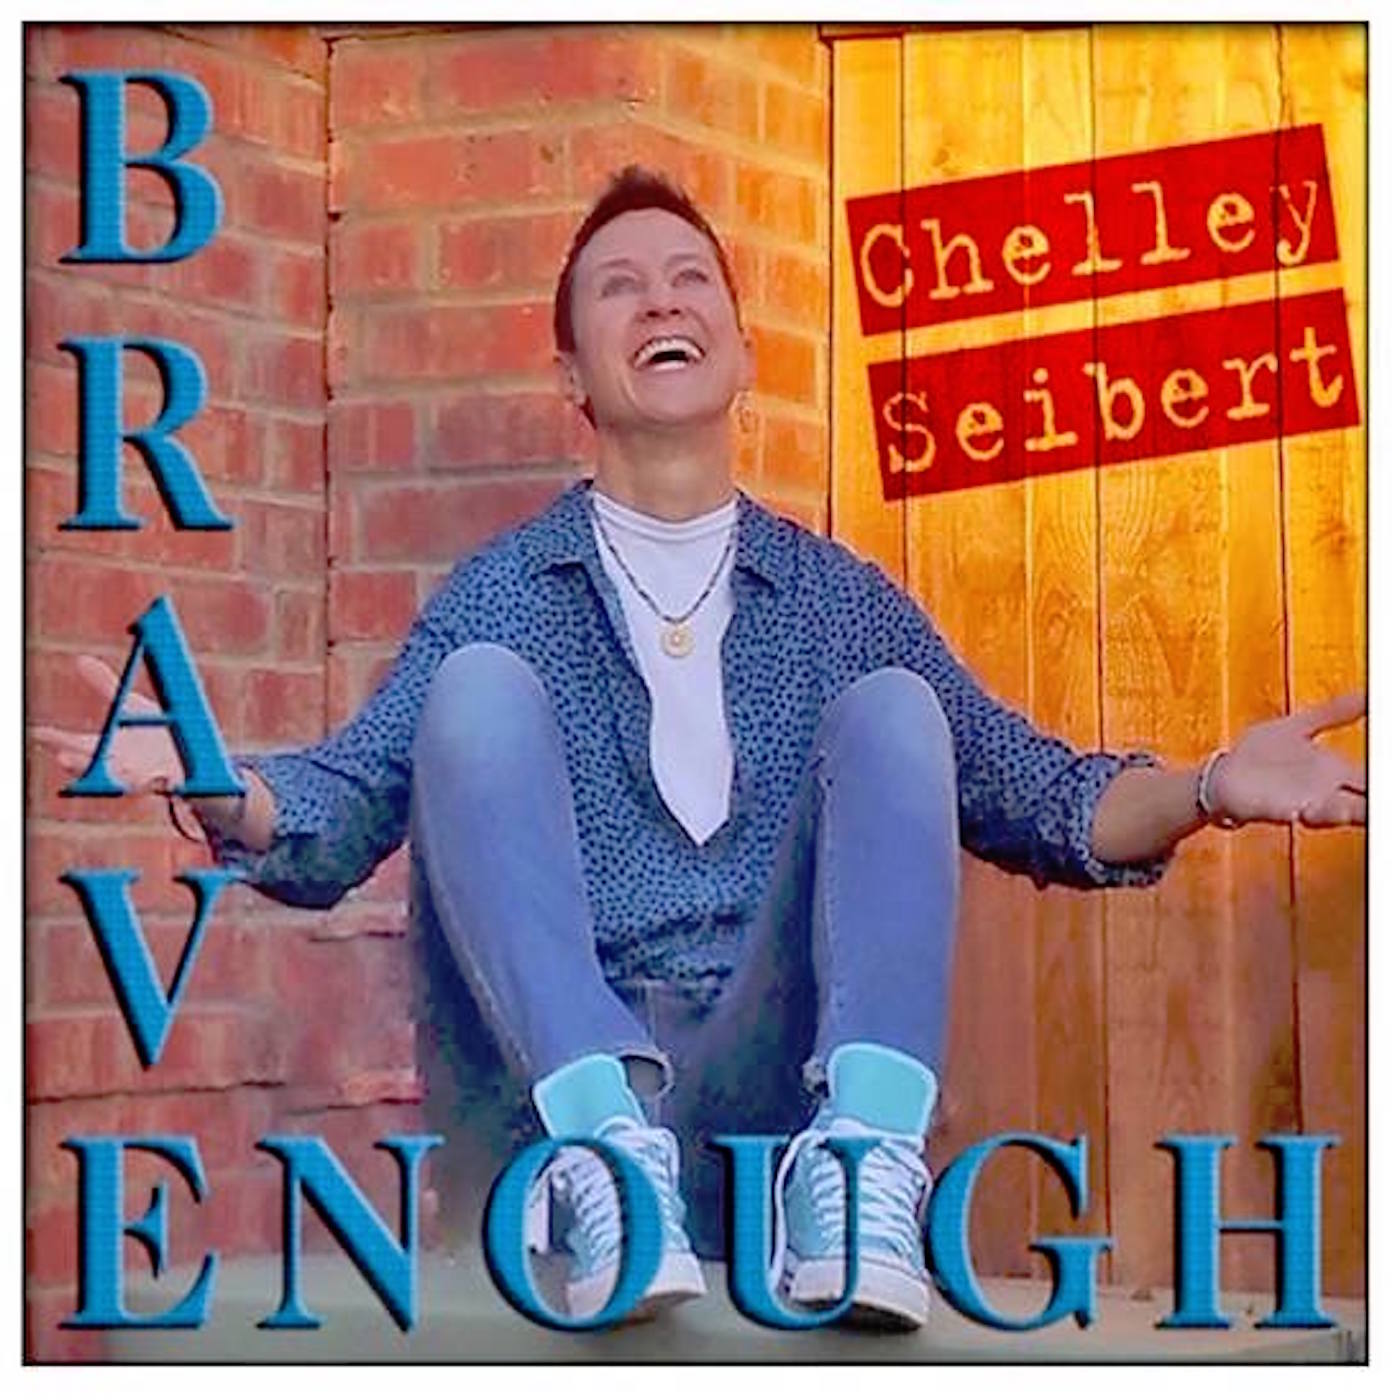 Chelley CD Cover